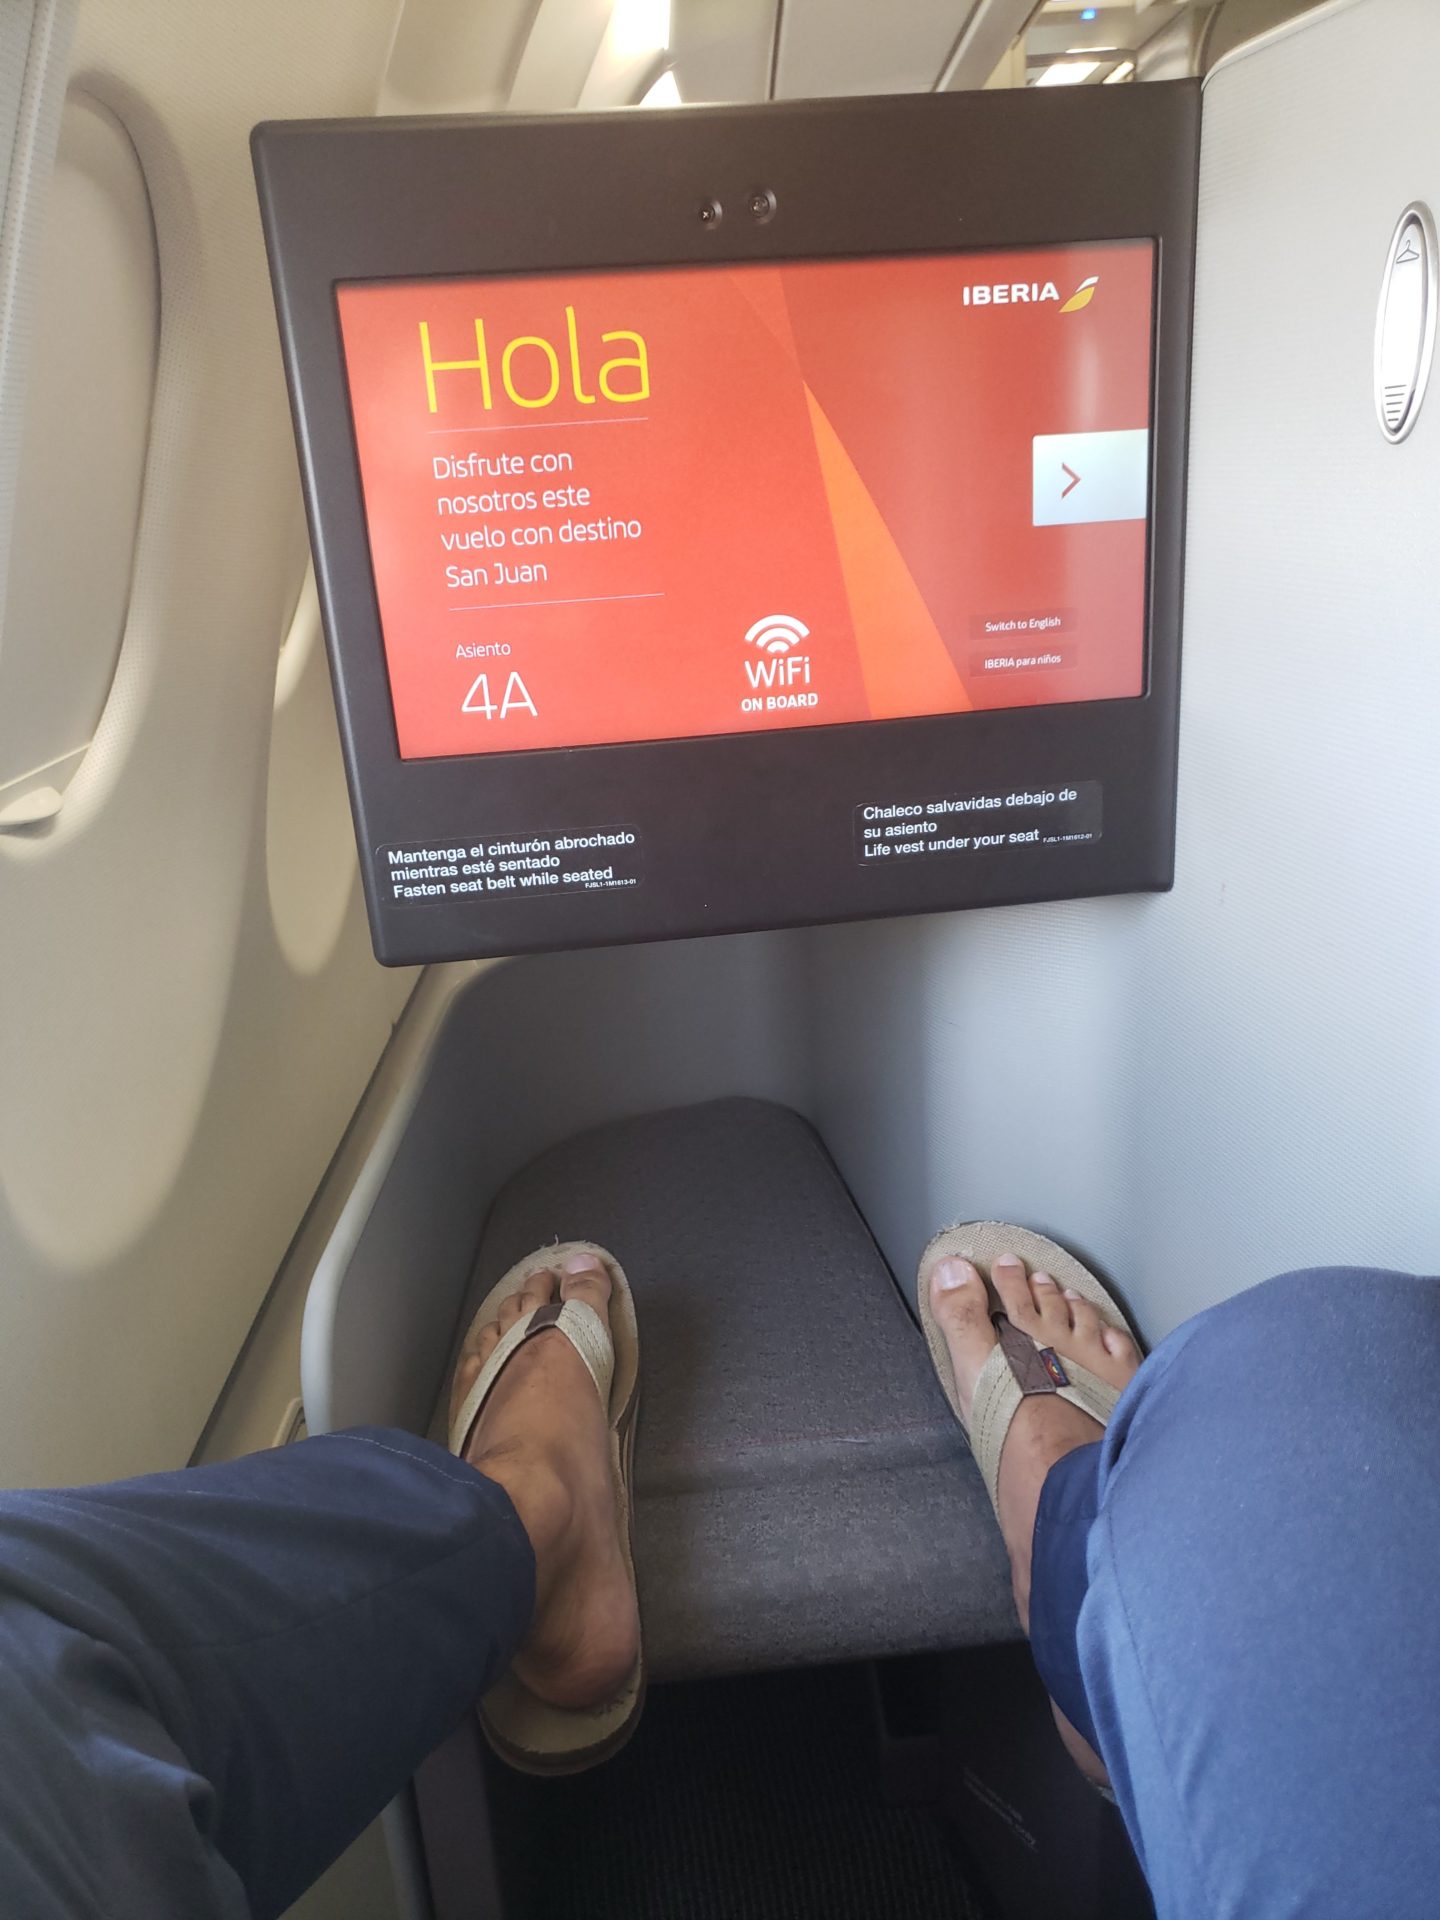 a person's feet in sandals on a seat in an airplane